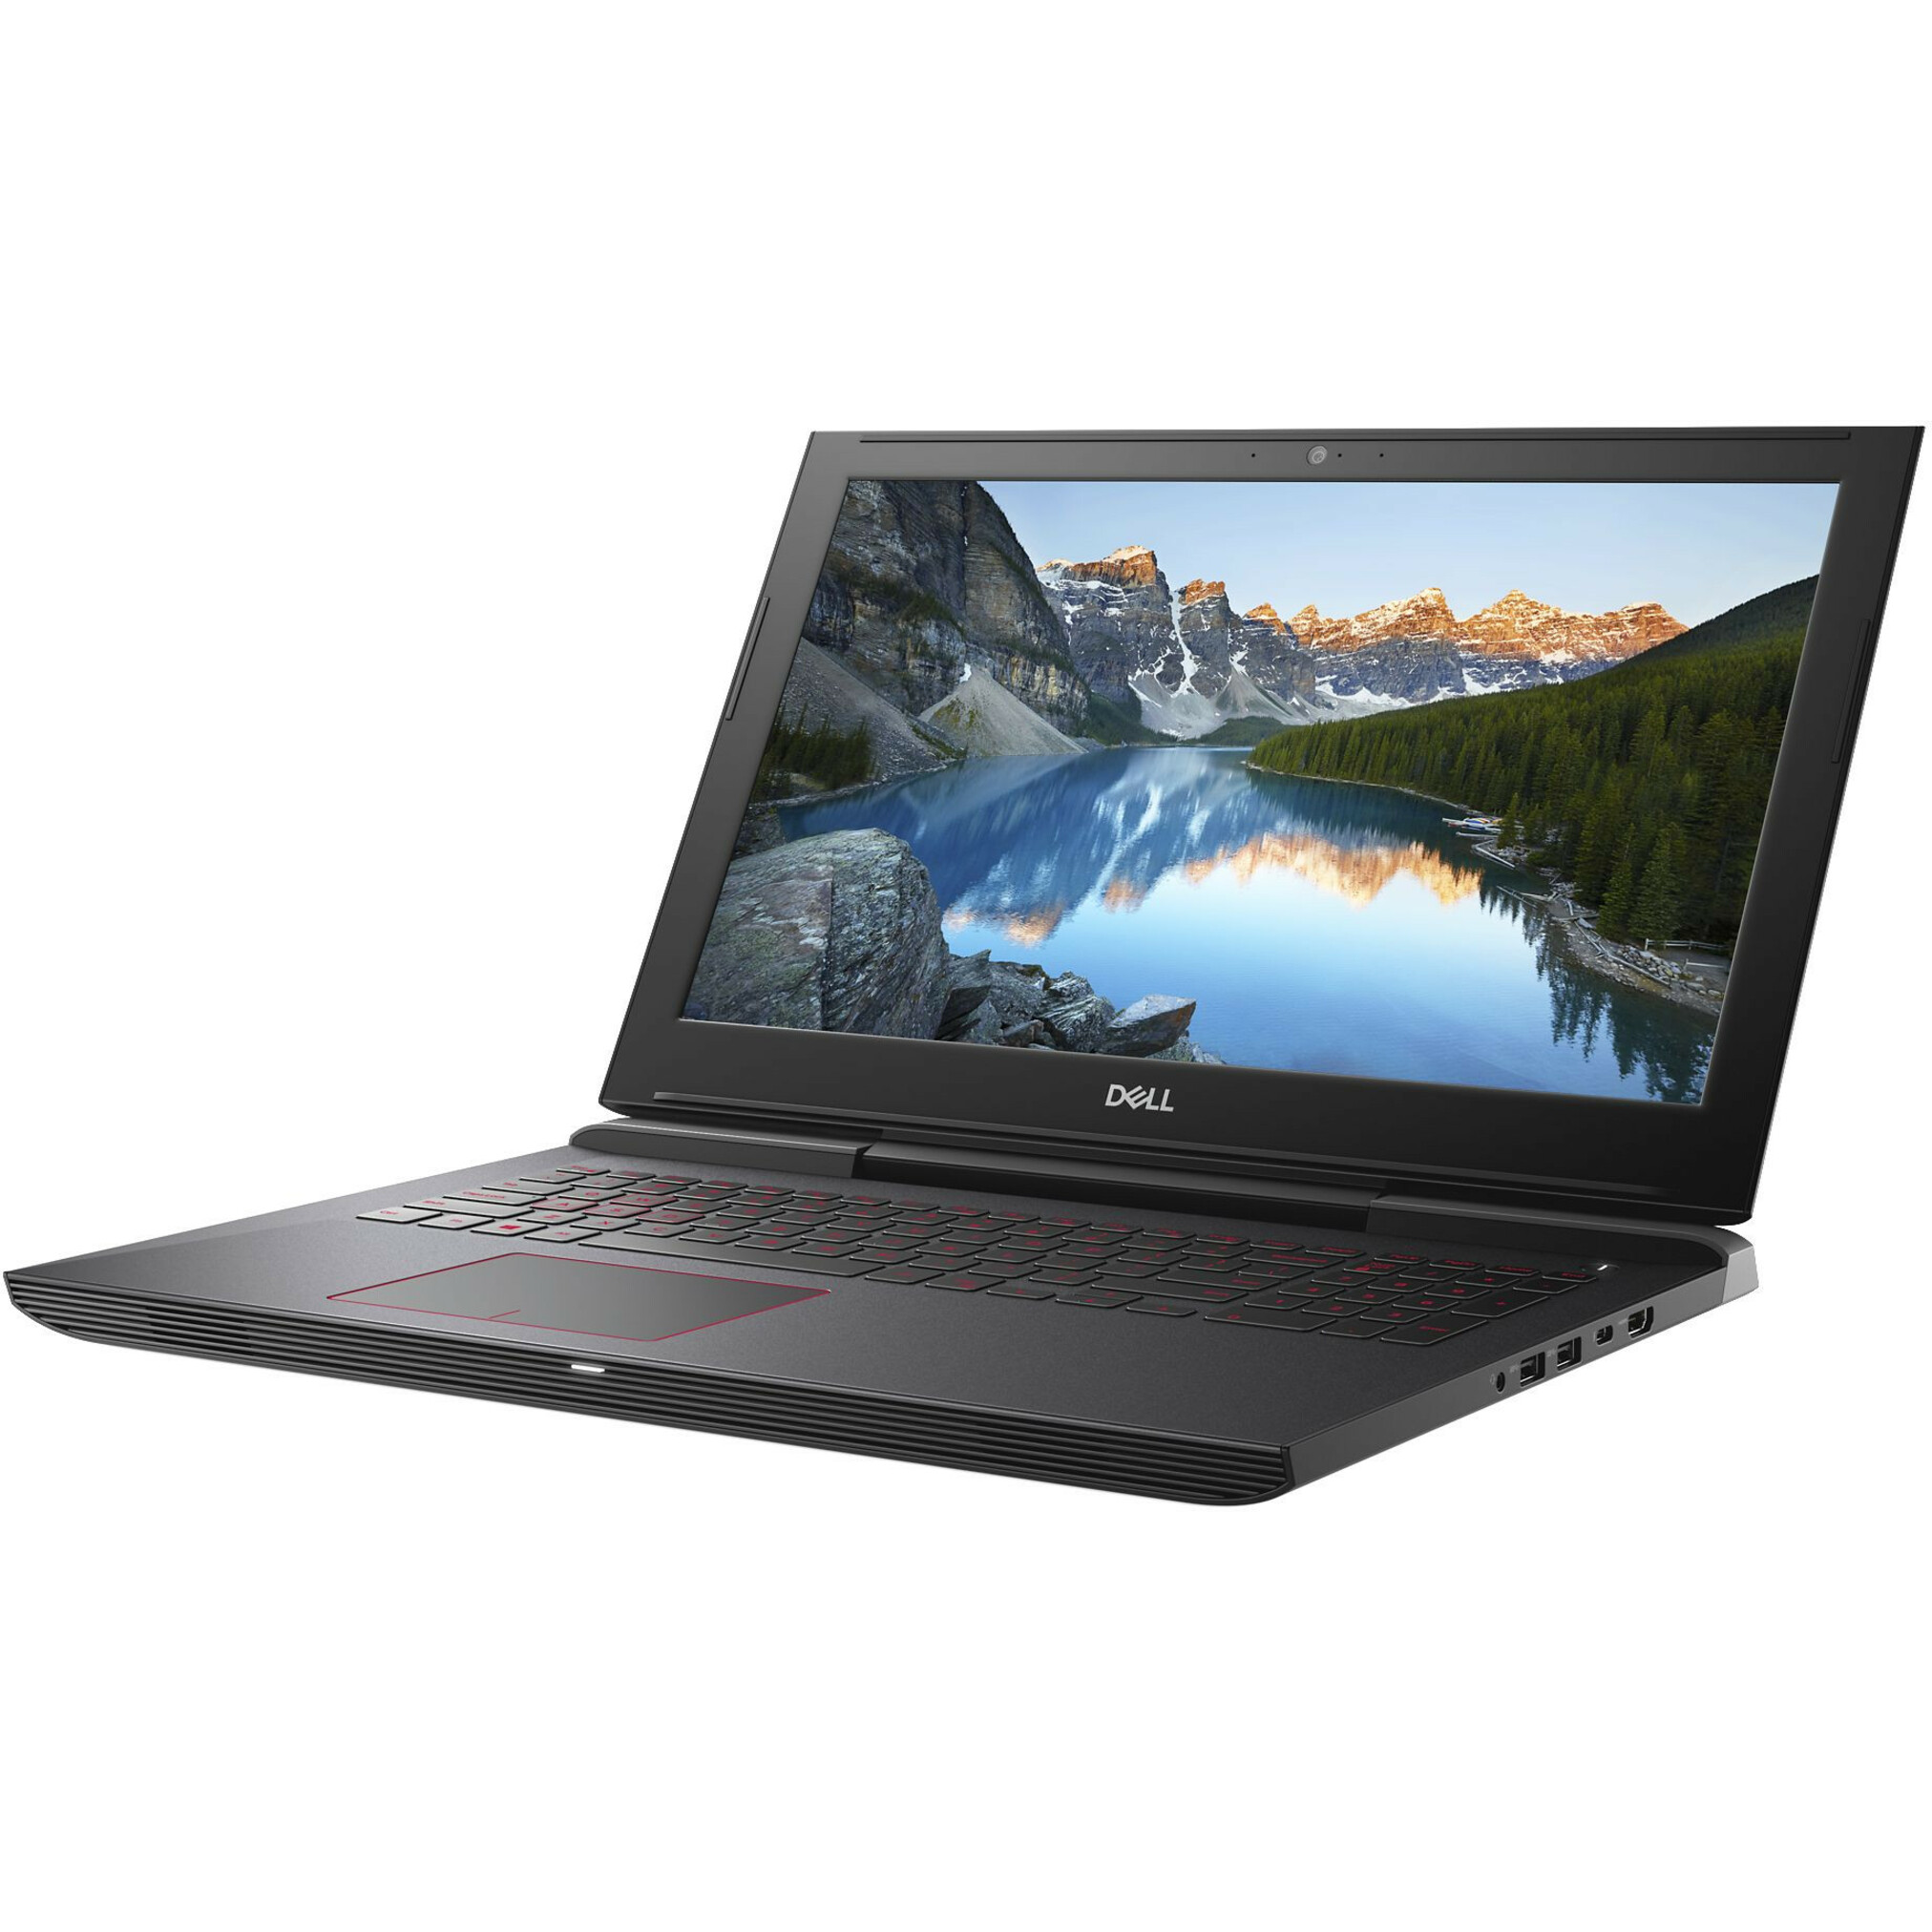 Dell Inspiron 15 7577 15.6 inch Gaming Laptop, Intel Core i5-7300HQ, 8GB Memory, 128GB Solid State Drive + 1TB HDD, NVIDIA® GeForce® GTX 1060 - image 23 of 23